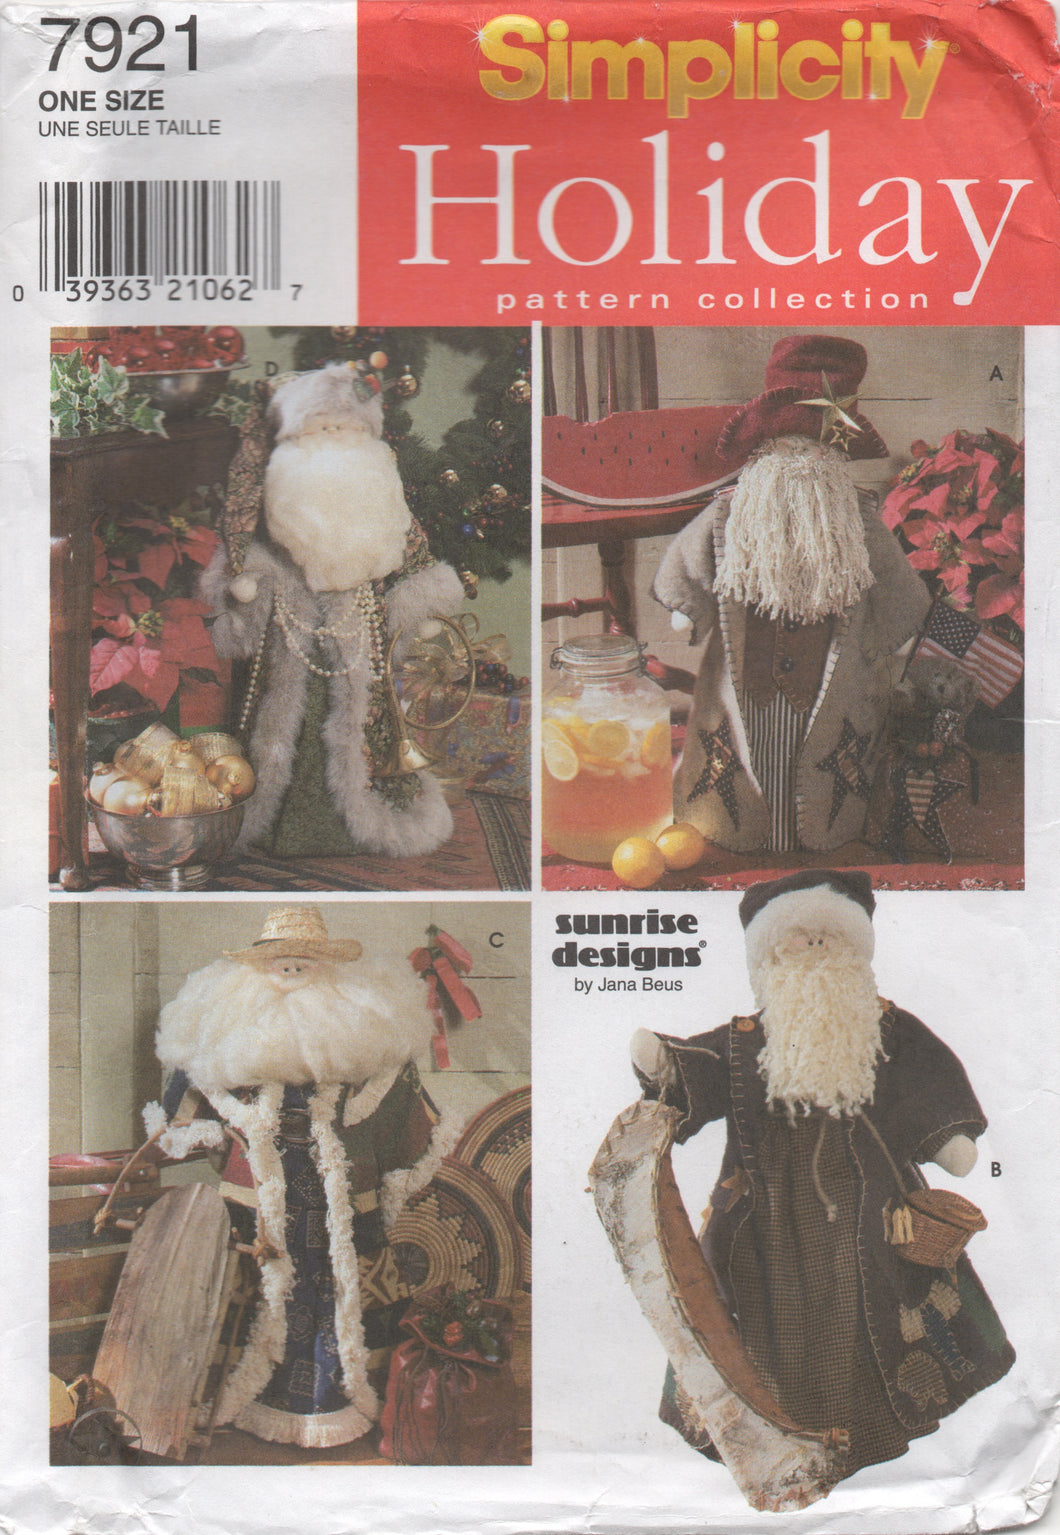 1990's Simplicity Sunrise Designs Santa Claus and Clothes Christmas Craft pattern - UC/FF - No. 7921